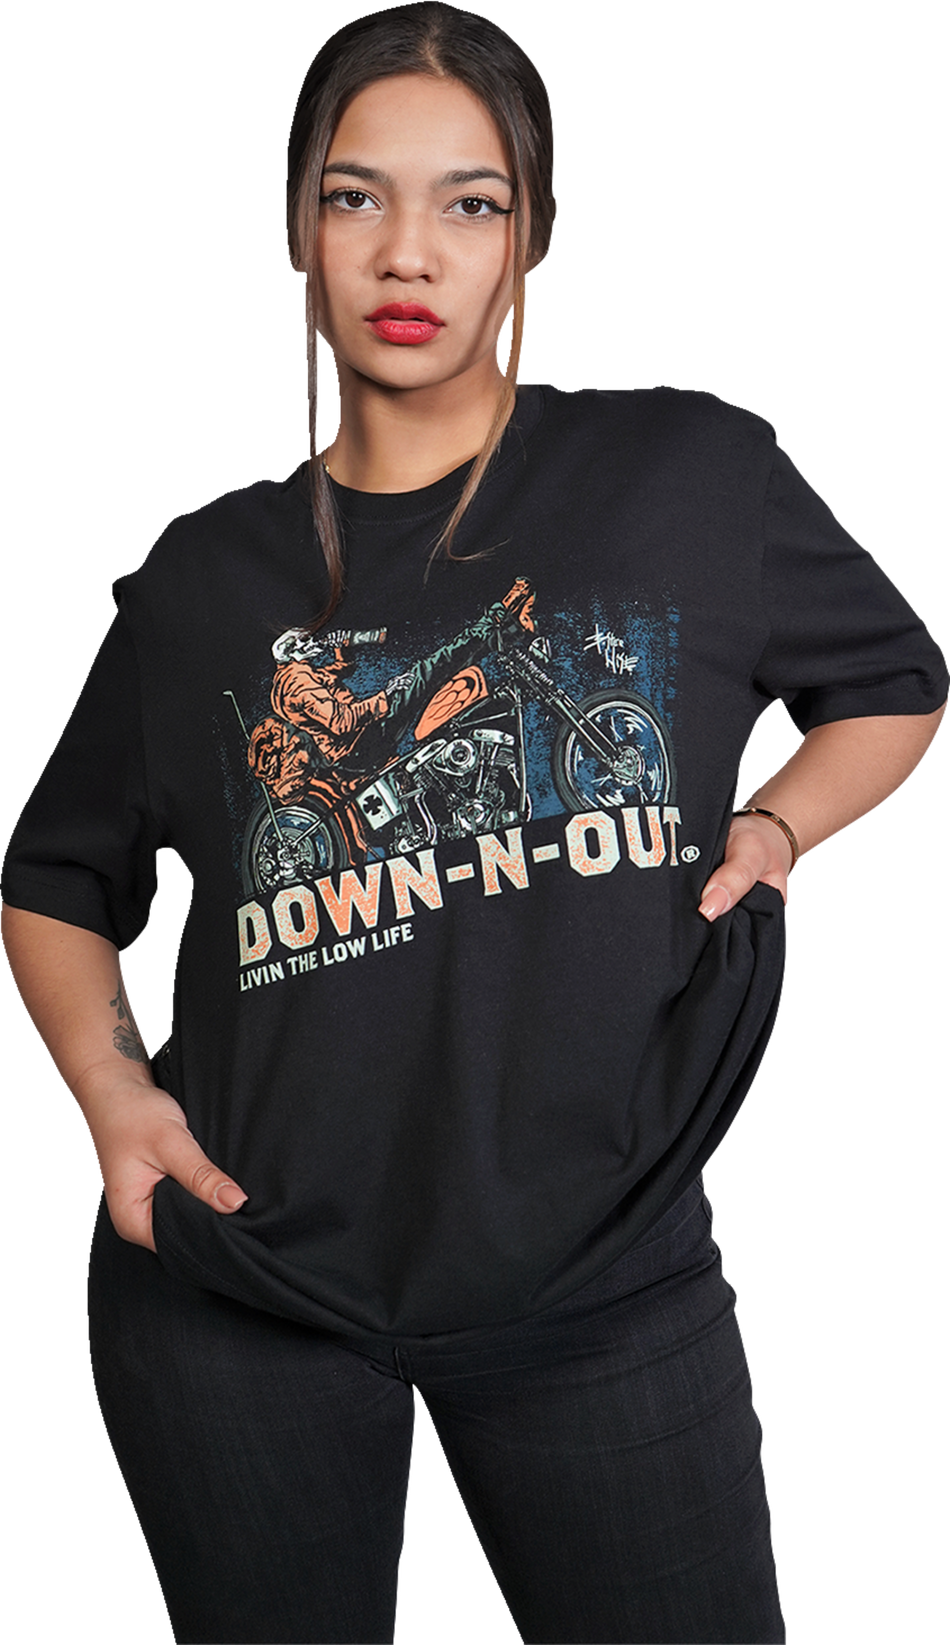 LETHAL THREAT Down-N-Out Party First Safety Second - Black - Medium DT10043M